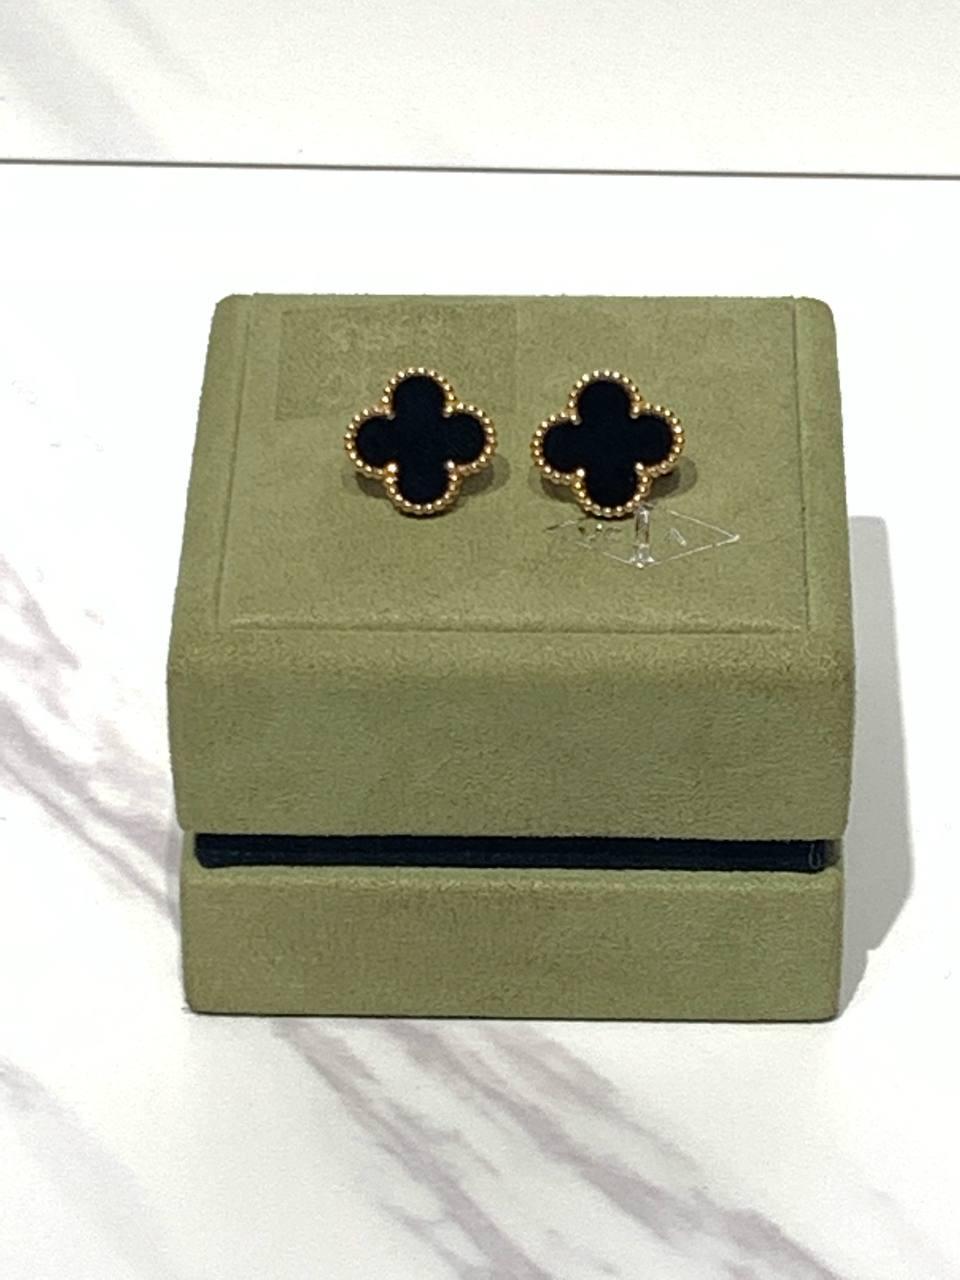 These classic earrings from the Vintage Alhambra collection by Van Cleef & Arpels feature black onyx inlays set in 18k yellow gold. An iconic and festive design inspired by the symbol of luck. 

The earrings come in a VCA box. 

STONES
Onyx

METAL